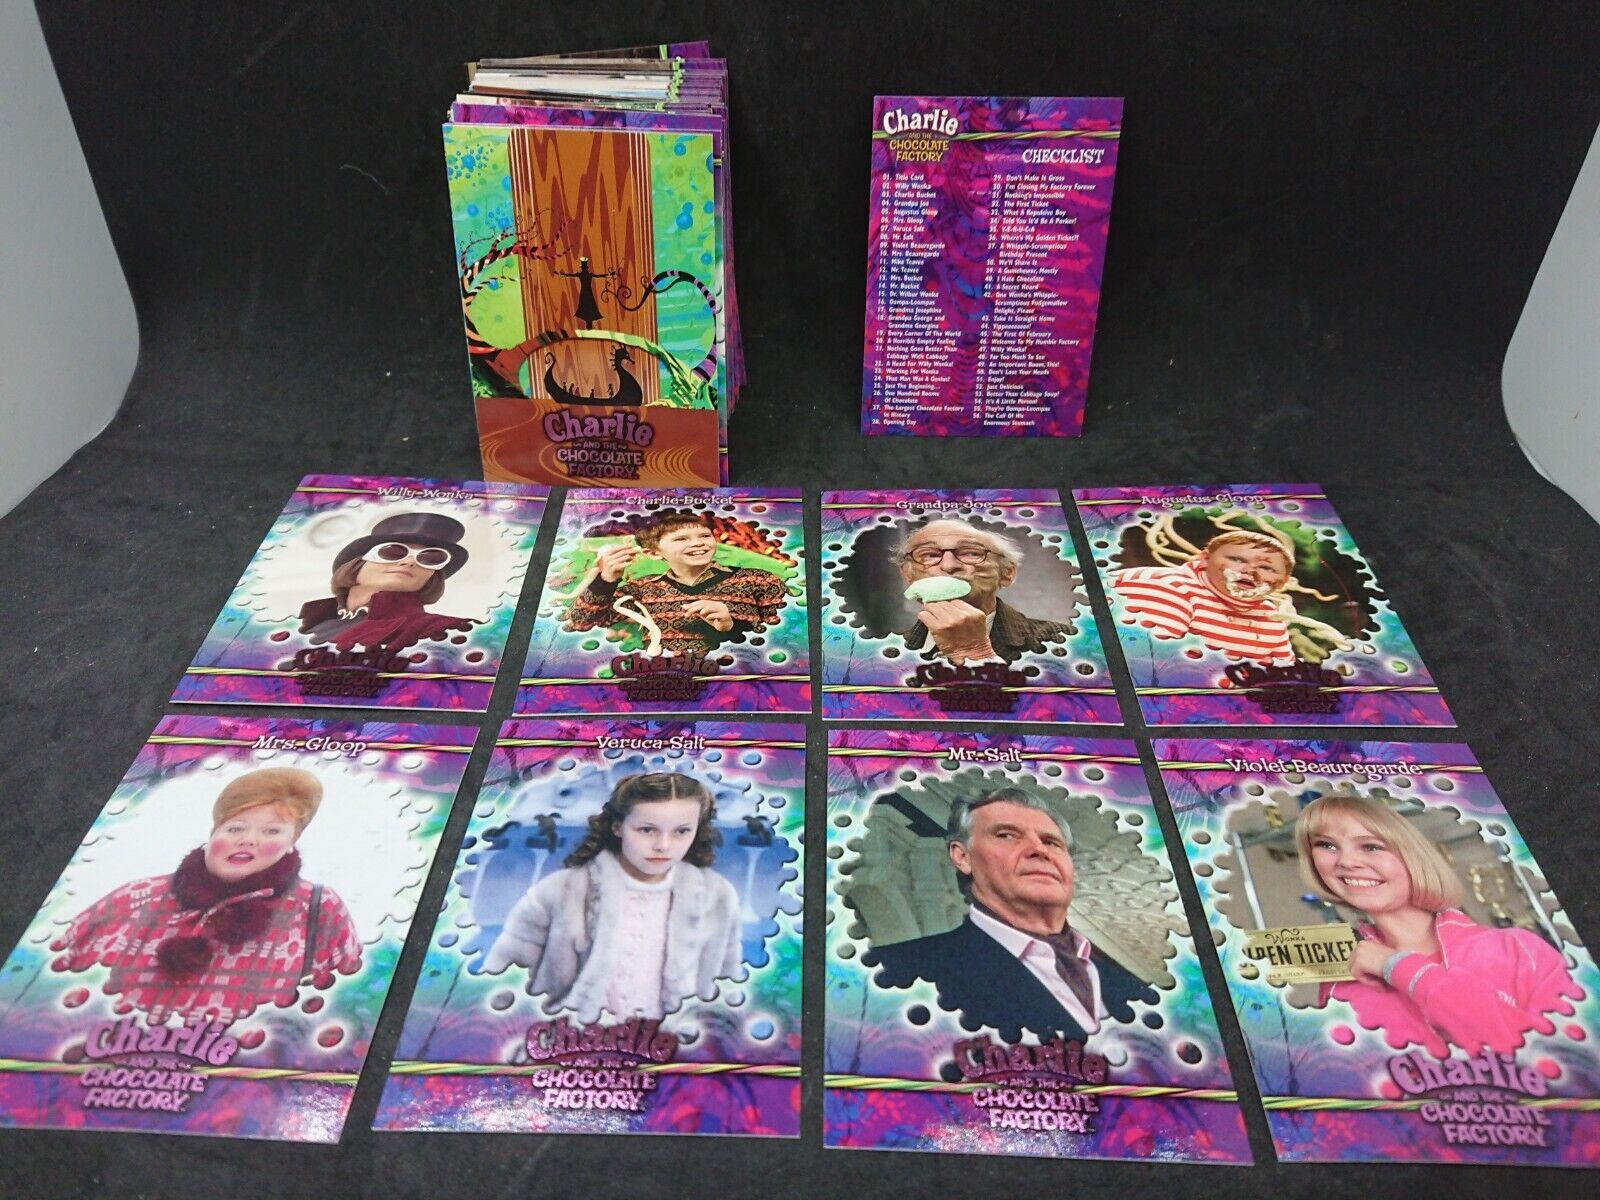 CHARLIE AND THE CHOCOLATE FACTORY MOVIE 2005 ARTBOX COMPLETE BASE CARD SET OF 90